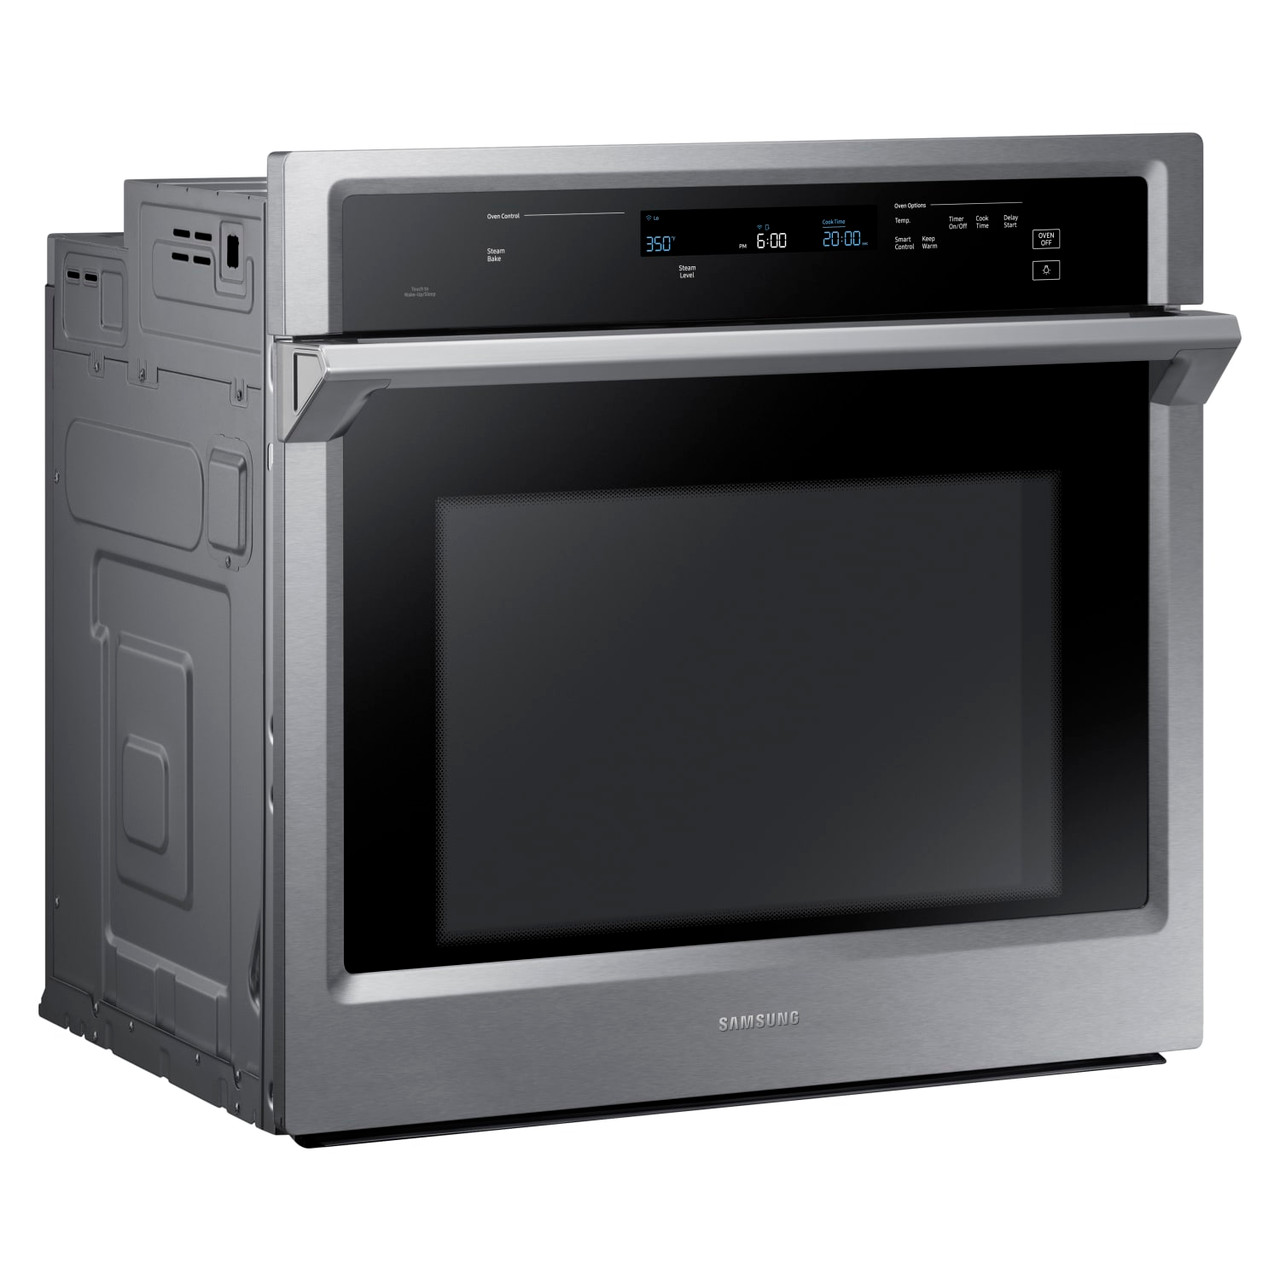 Samsung 30” Single Wall Oven in Stainless Steel - NV51K6650SS